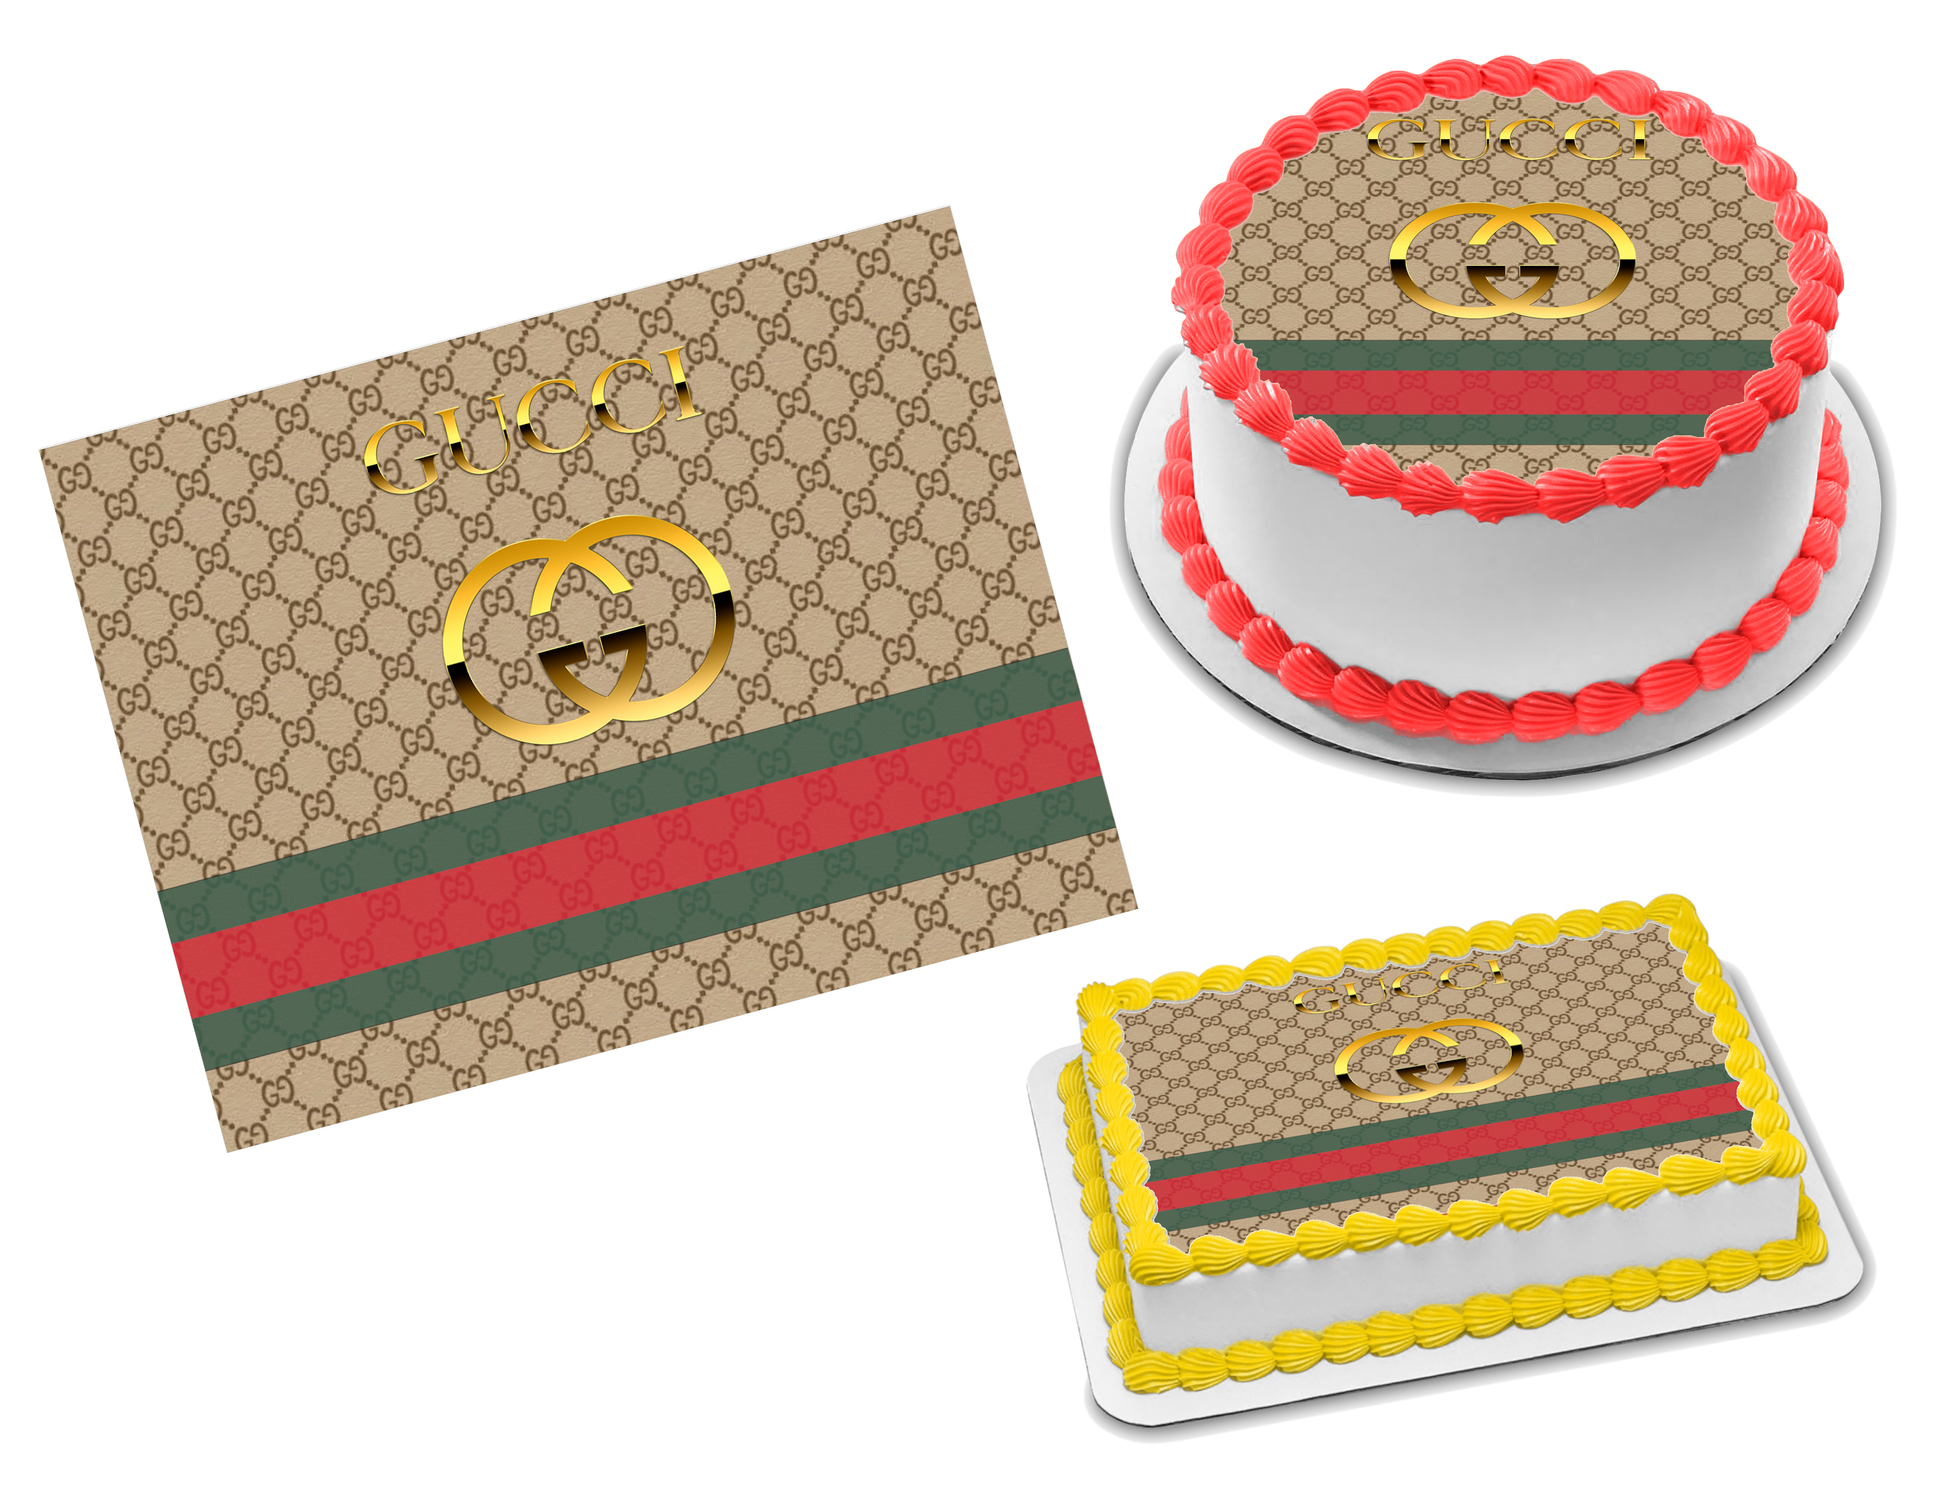 Louis Vuitton Red White Supreme Wrap Edible Image Cake Topper Personalized  Birthday Sheet Decoration Custom Party Frosting Transfer Fondant